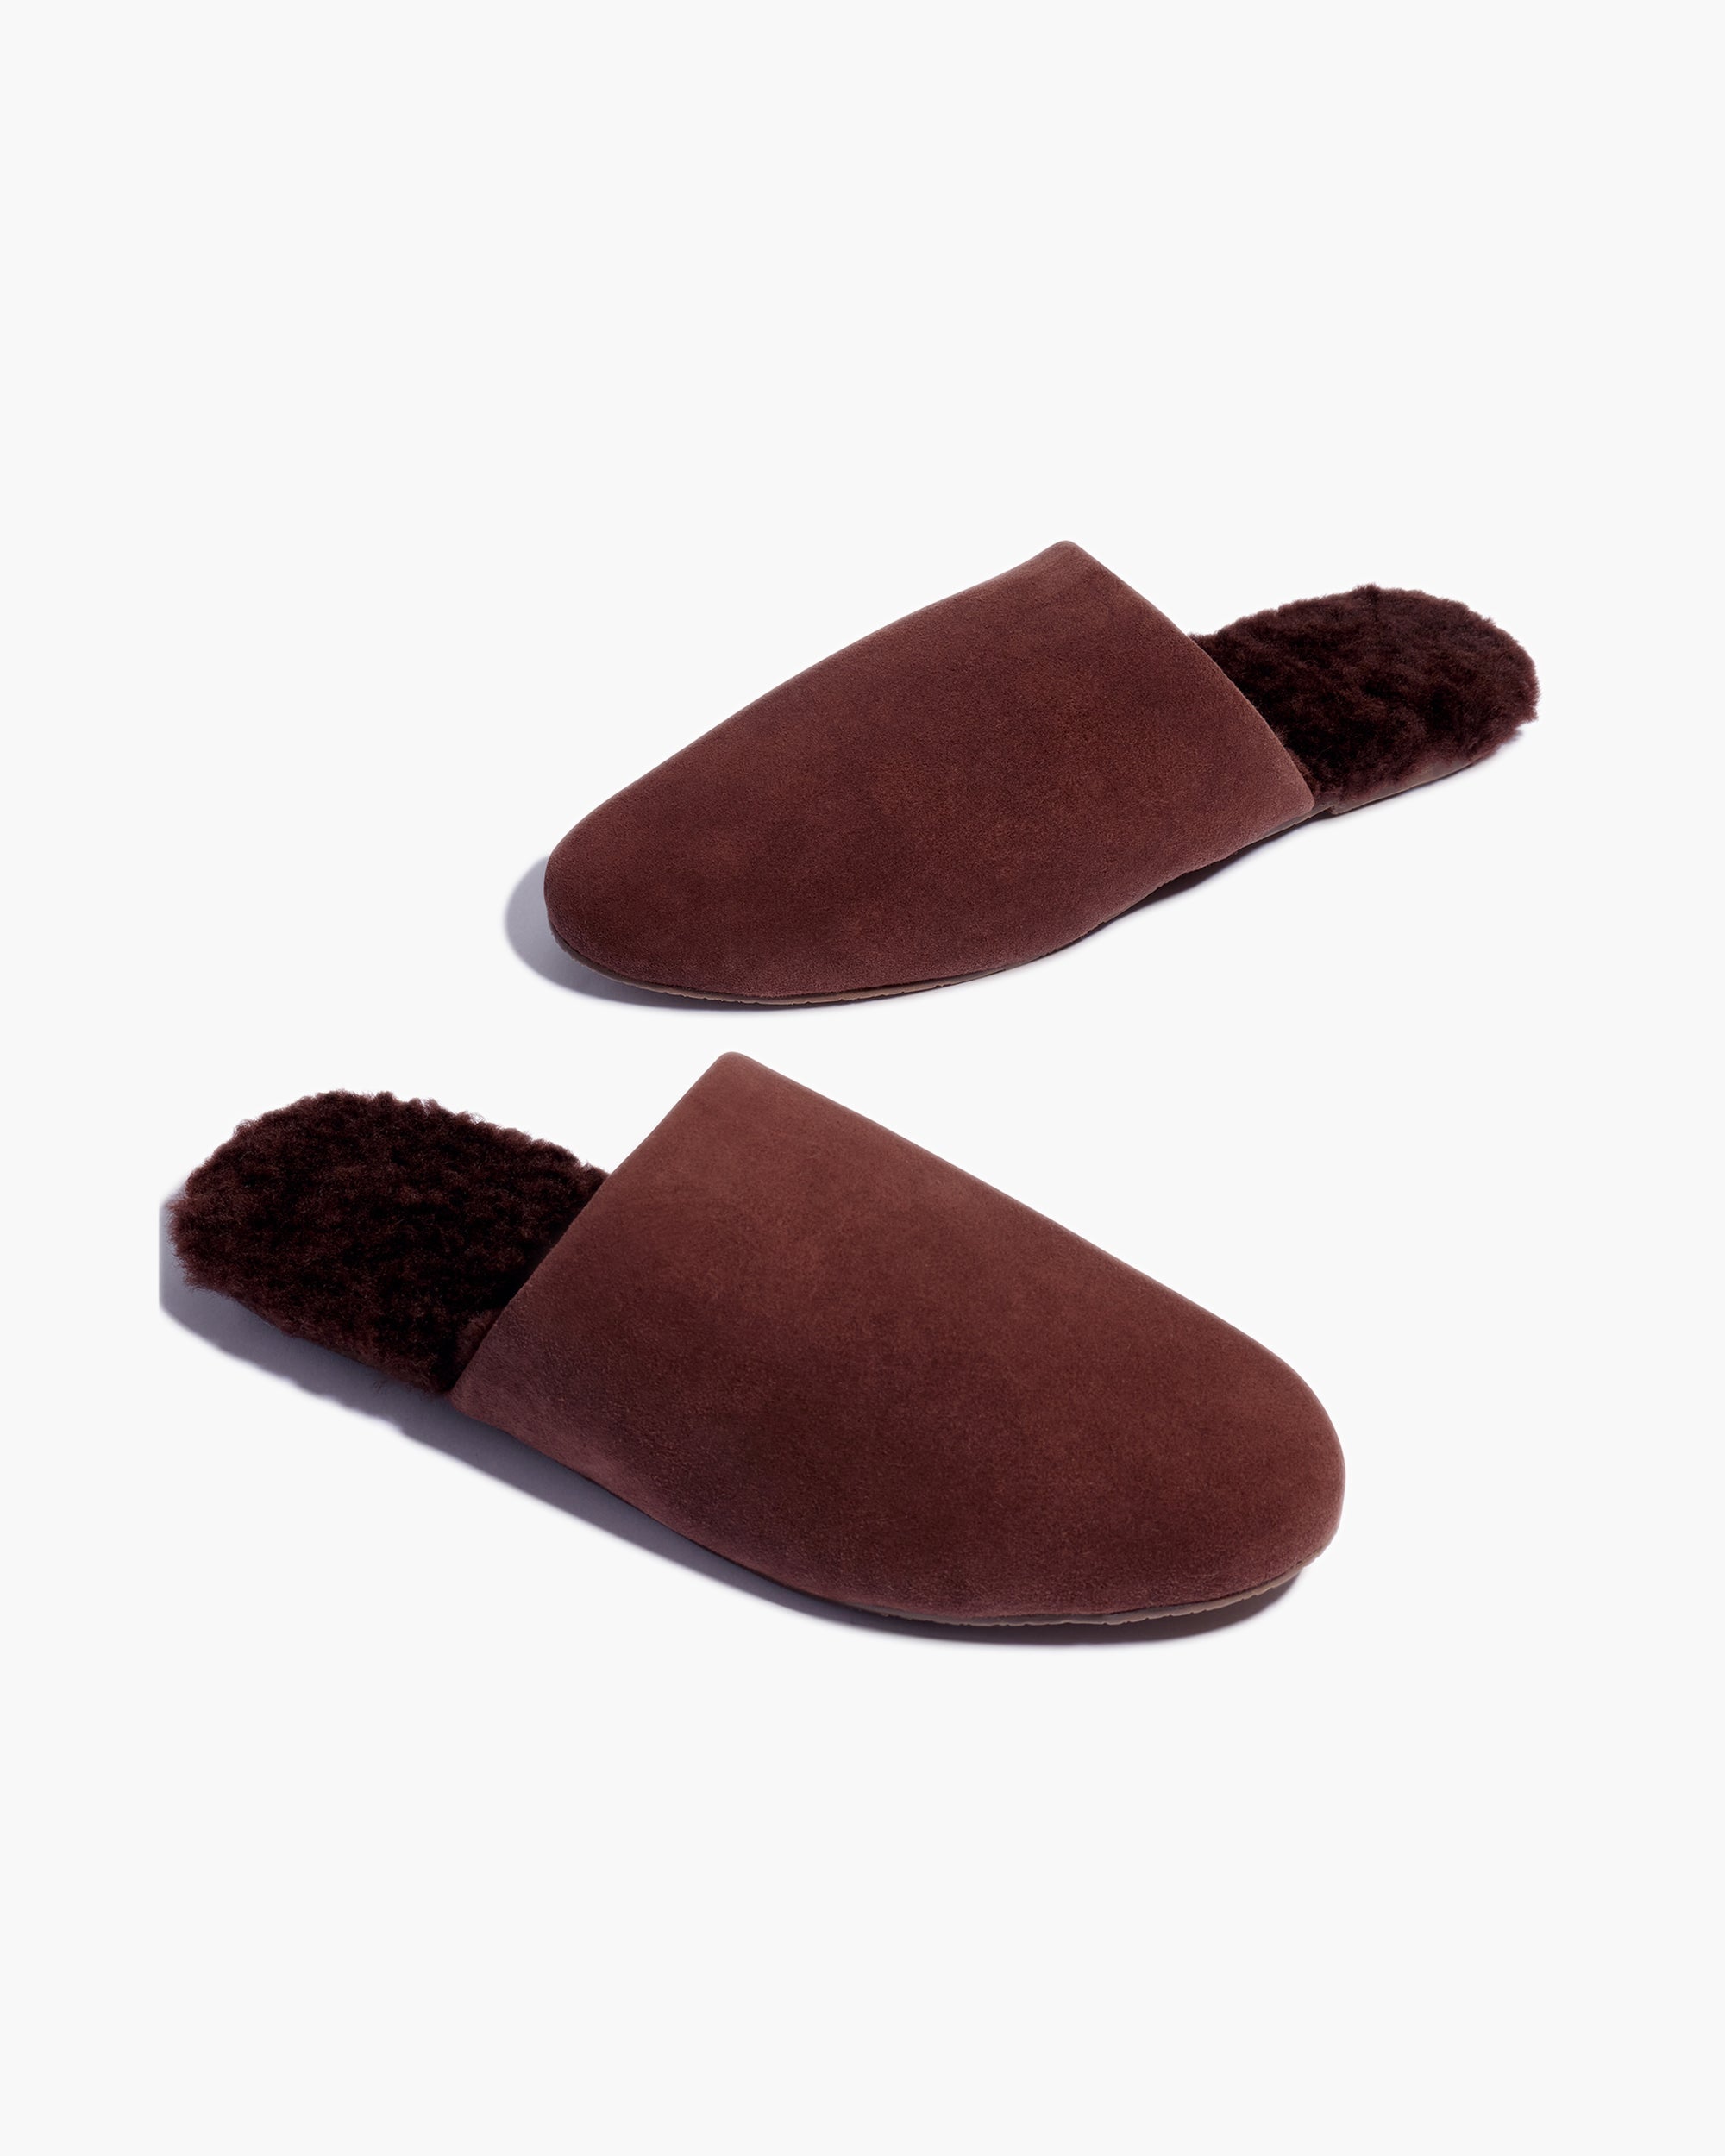 Chocolate Women's's's's's's's's's's's's's's's's's's's's's's TKEES Ines Shearling Slides | WLJYFA724